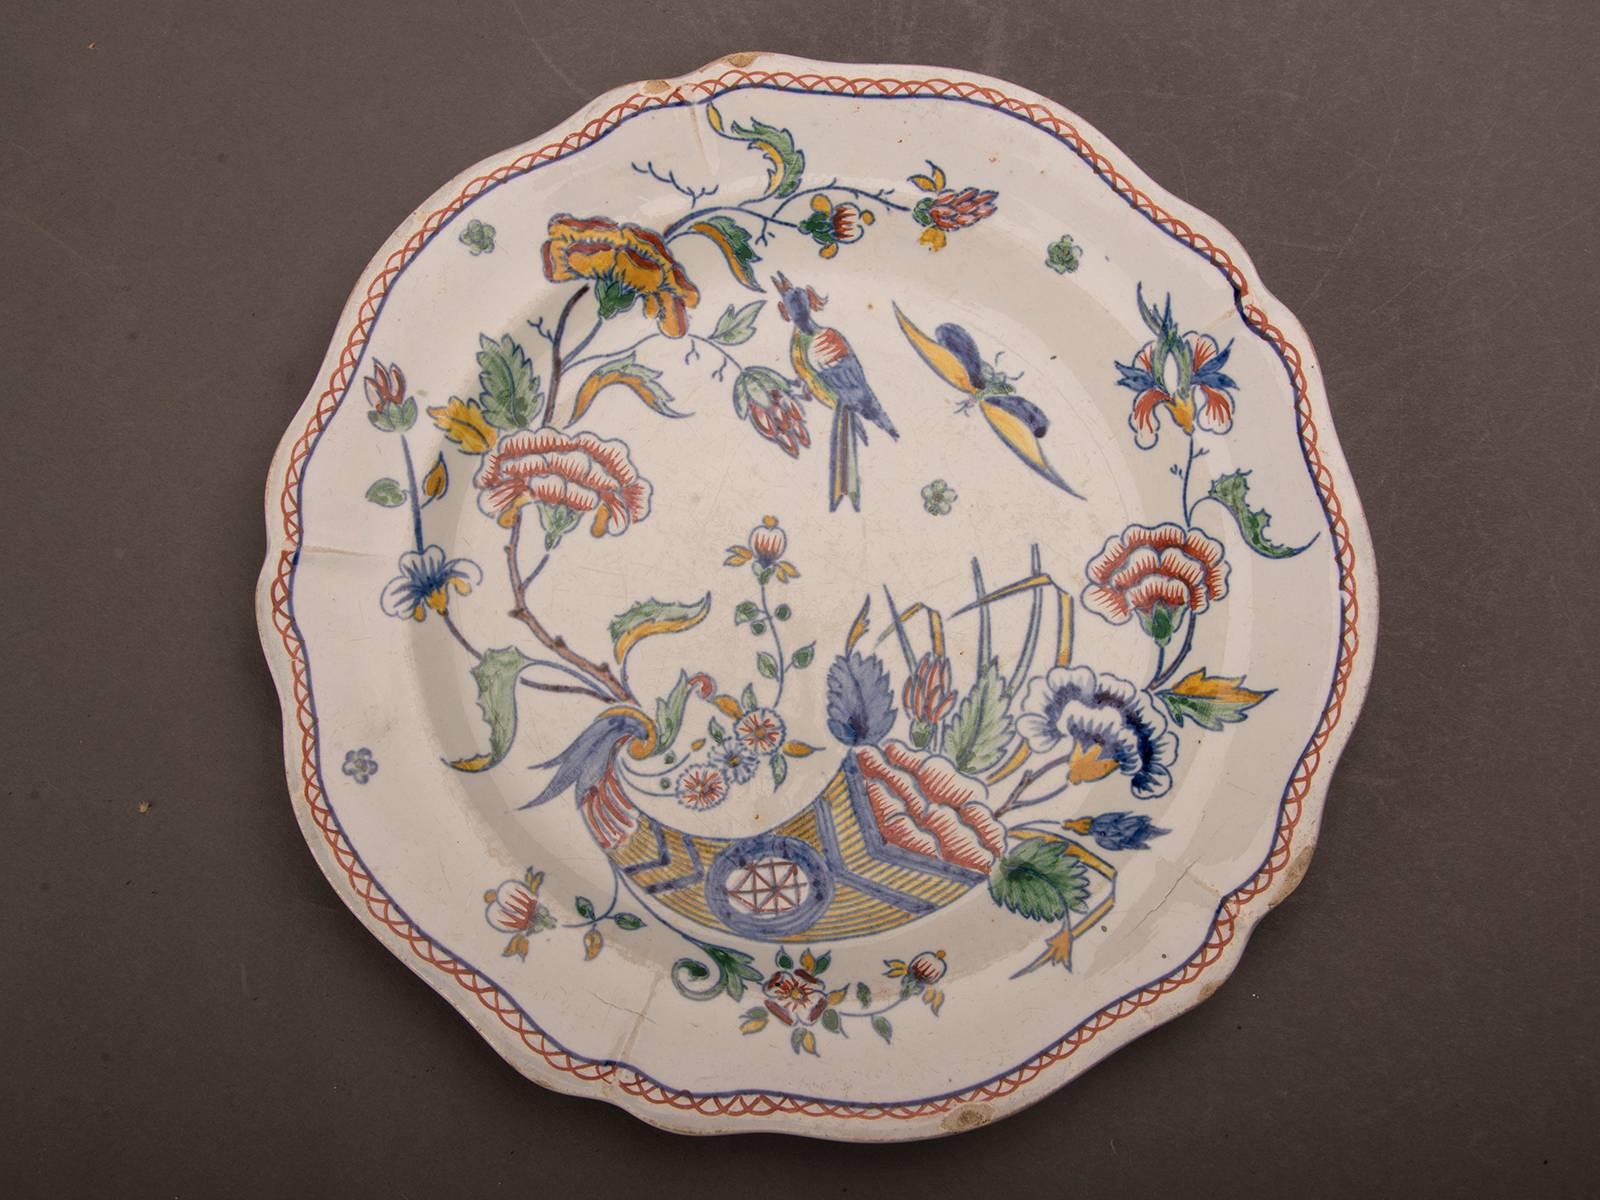 Three individual antique French Gien plates, circa 1860 with hand-painted multi-coloured floral, bird and Horn decoration and a scallop edge shape. The distinctive faience finish with its low lustre glaze is immediately apparent as it imparts a